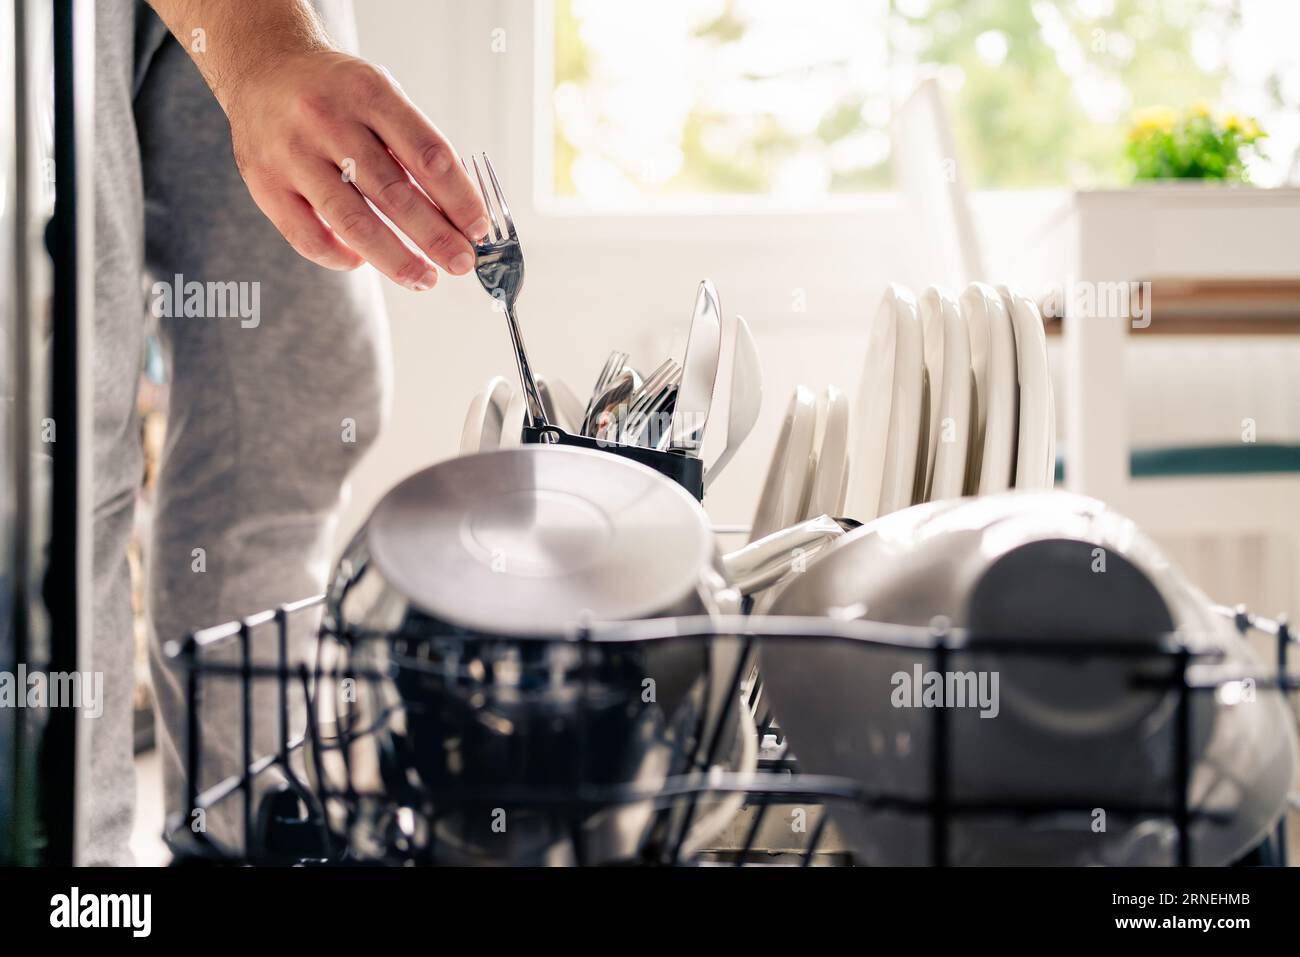 Dish washer machine in kitchen. Man loading dishwasher. Washing plates. Fork in hand. Full of cutlery. Clean or dirty. Pot and tableware. Stock Photo